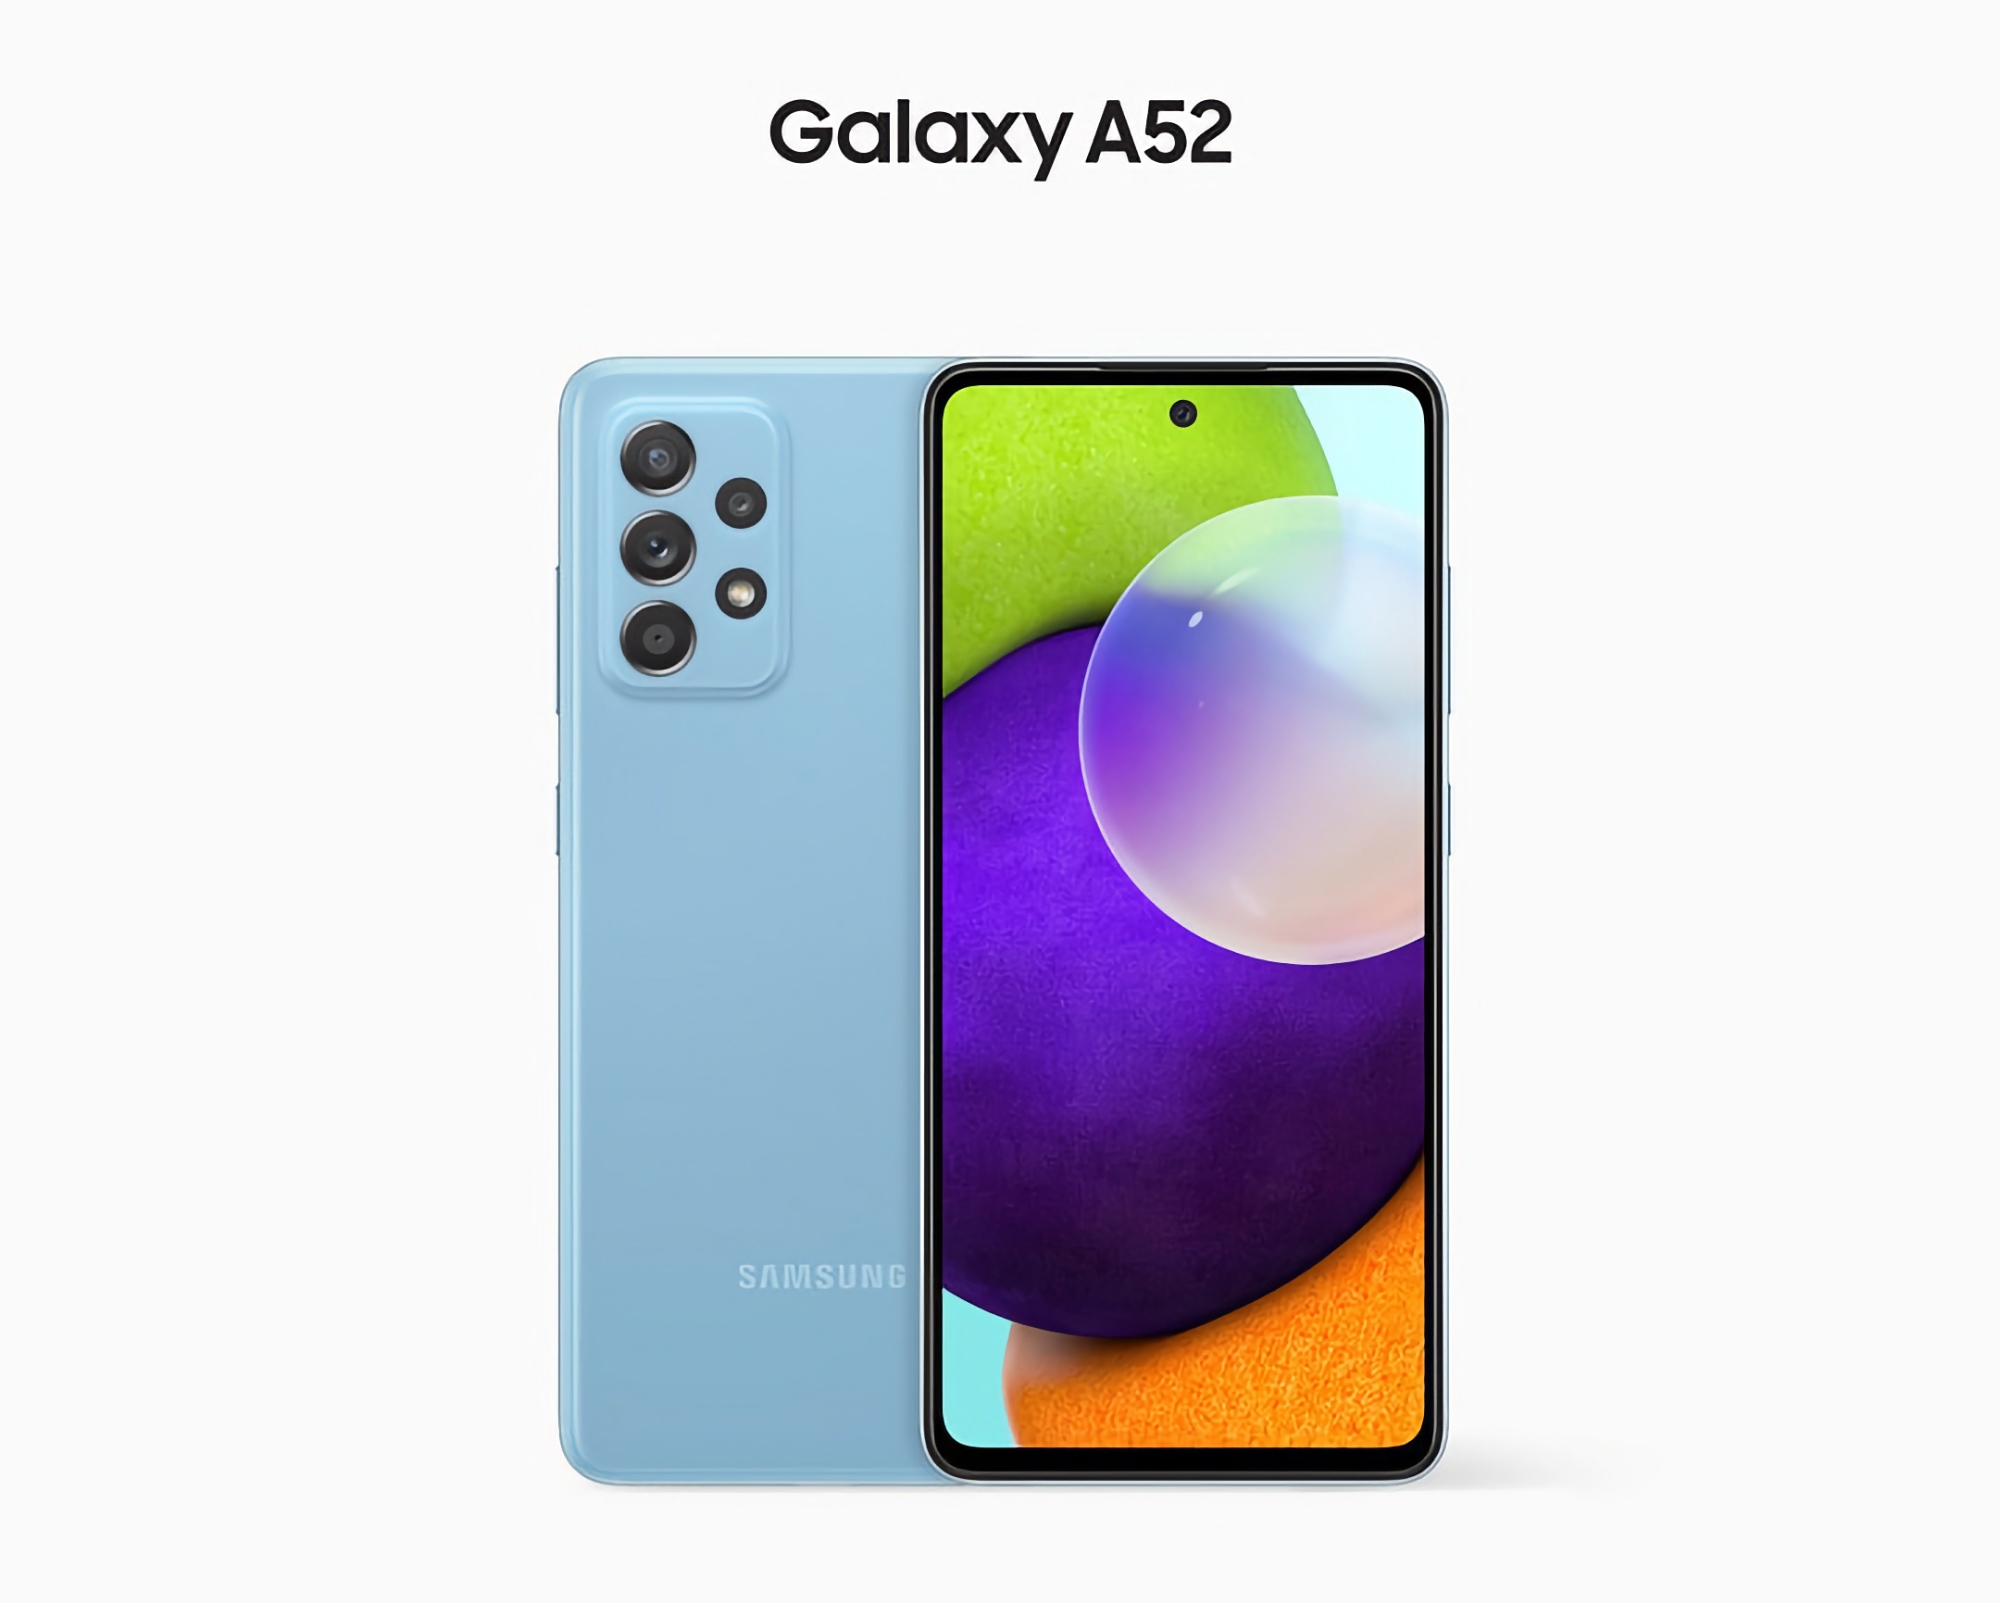 Finally, the Samsung Galaxy A52 is getting a stable version of Android 13 with One UI 5.0